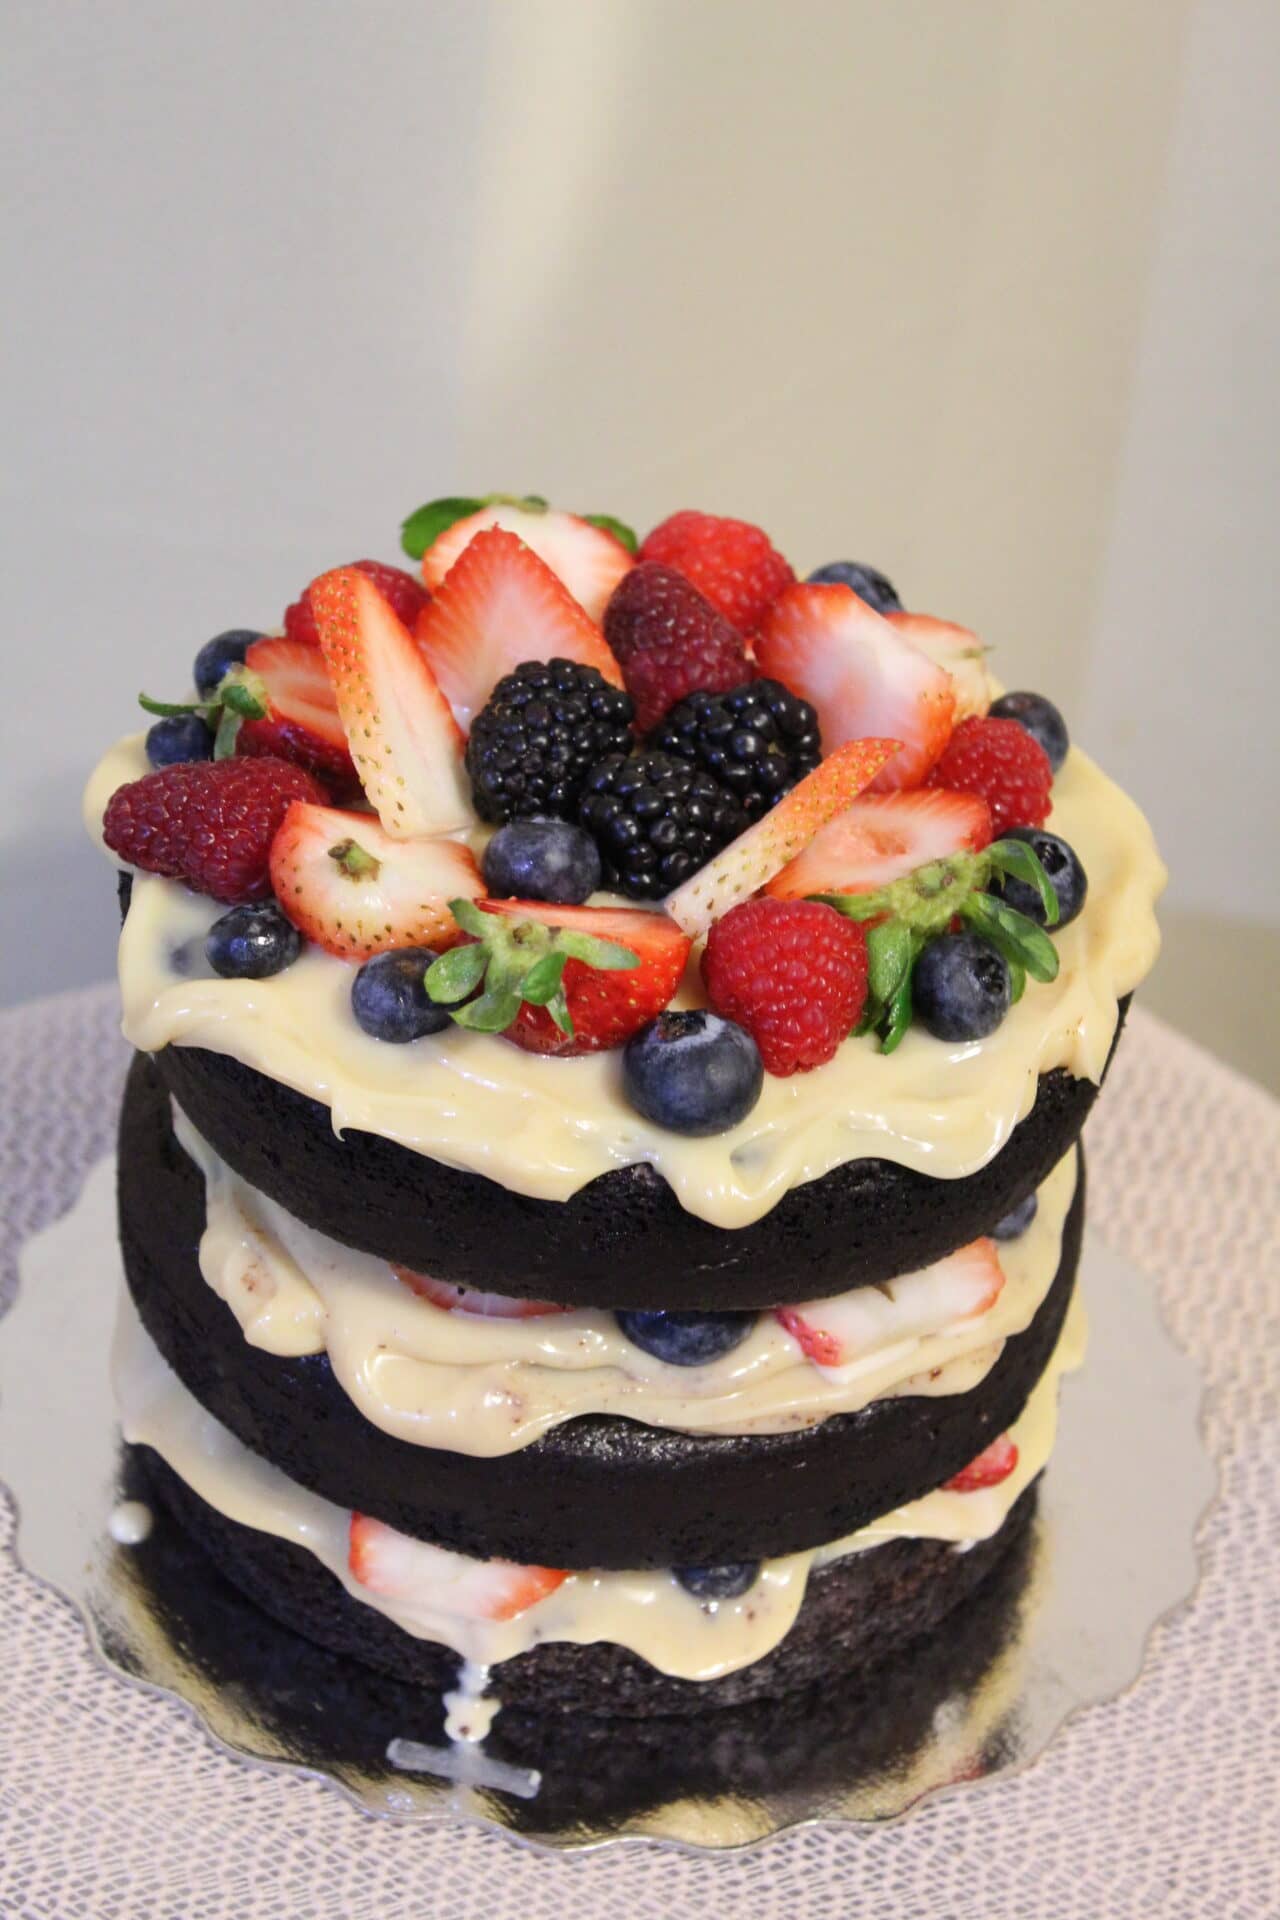 Buy Online Choco Berry Cake To Make Someone's Day More Special | Winni.in